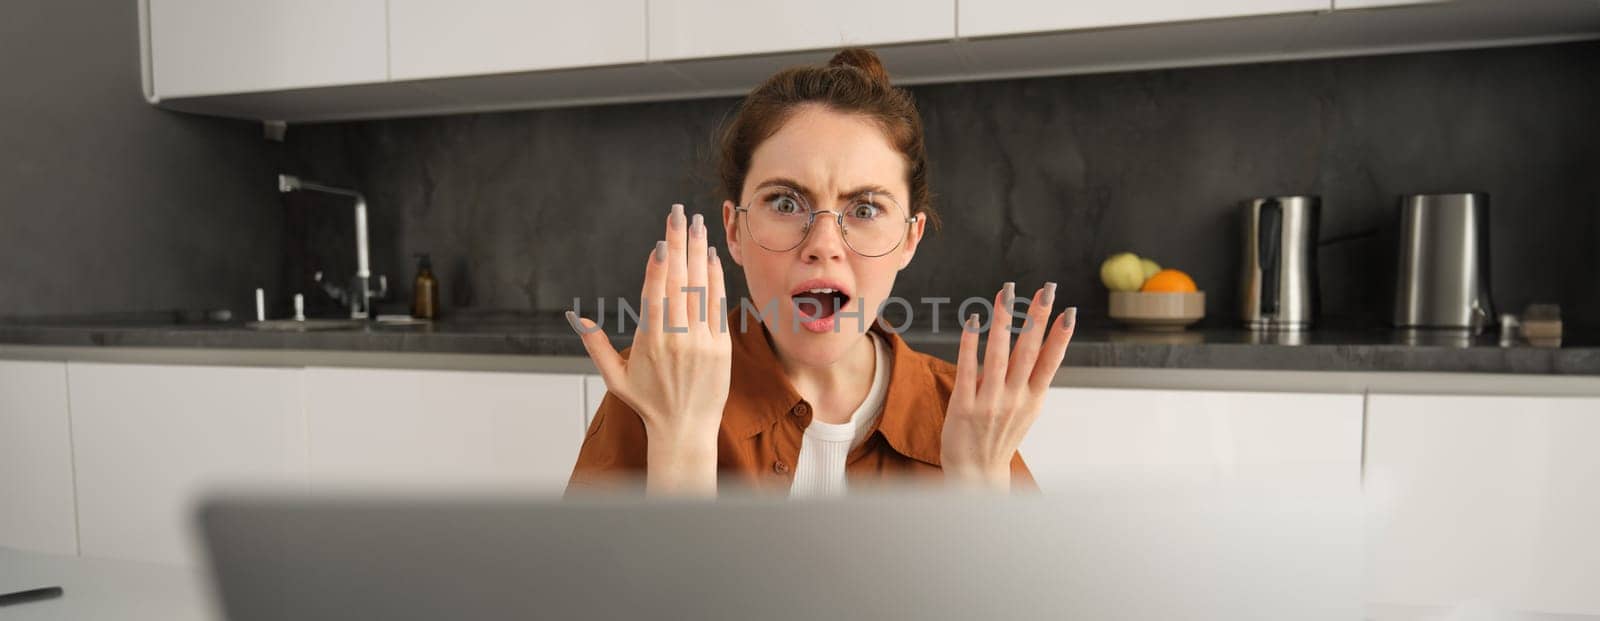 Portrait of woman has disappointed reaction, seeing upsetting news on laptop screen, looking frustrated or shocked, sitting at home in kitchen.